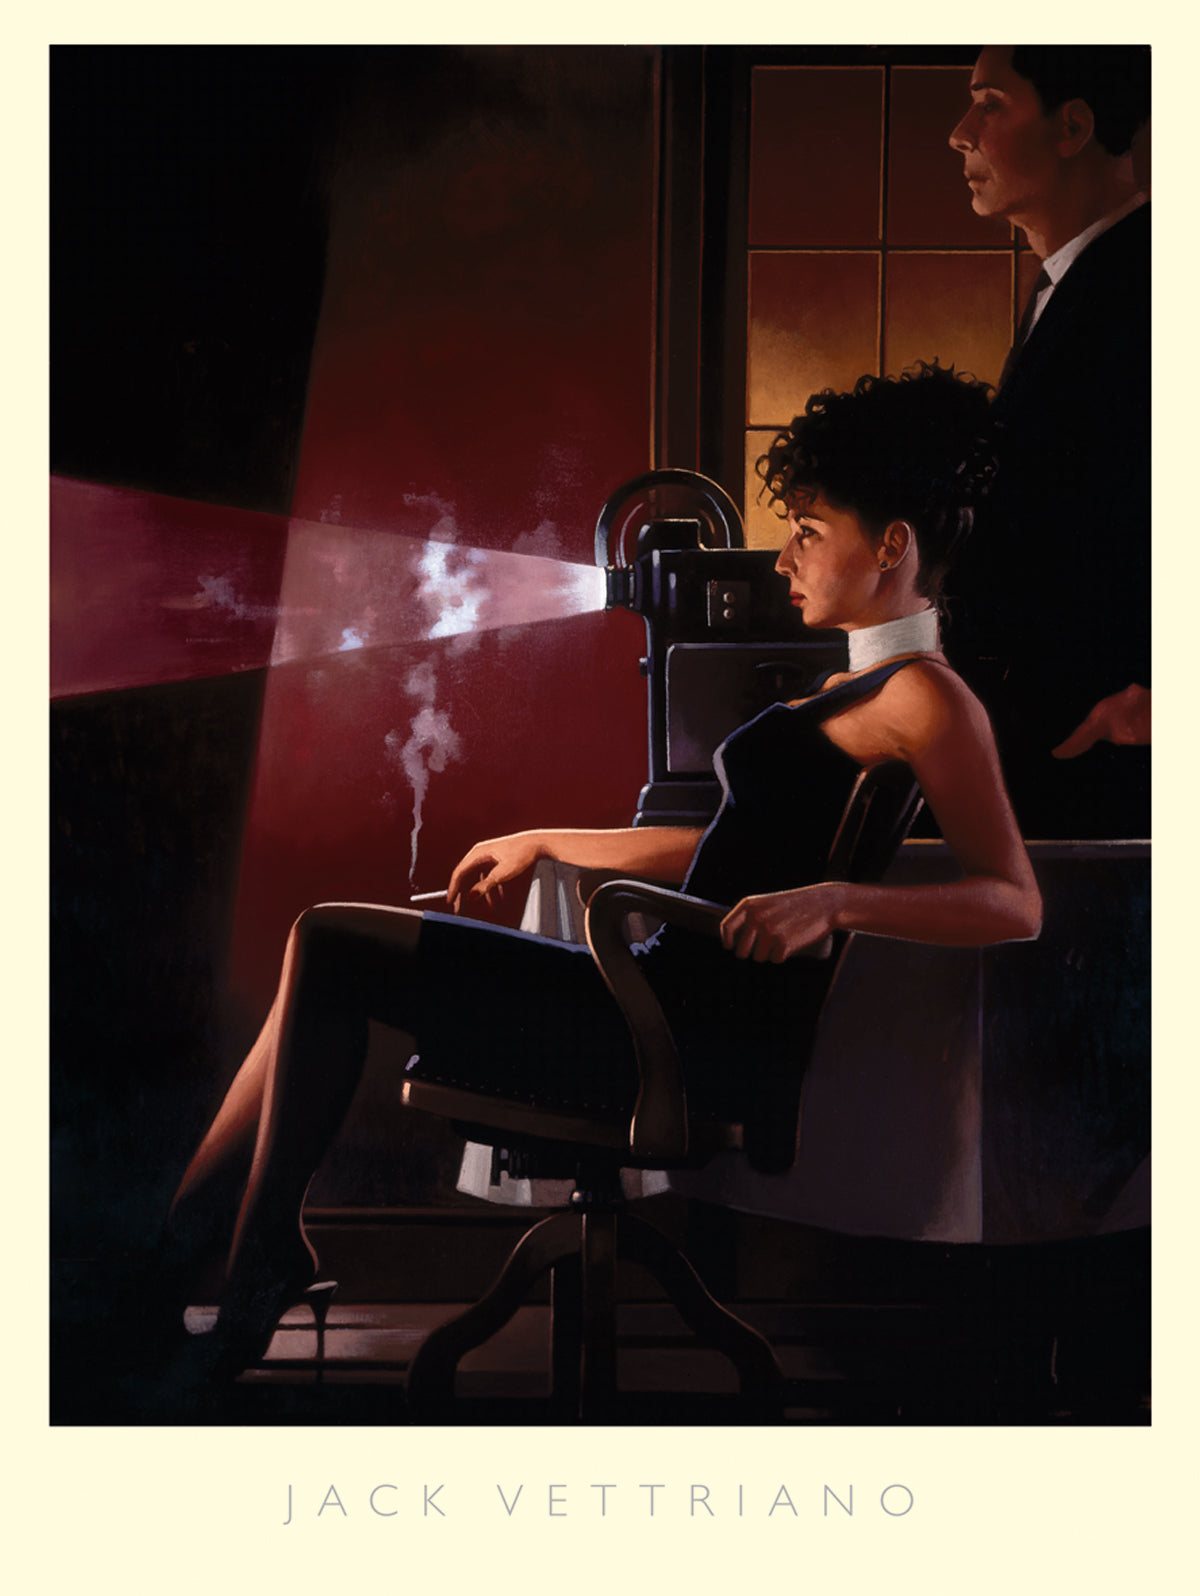 Jack Vettriano - An Imperfect Past